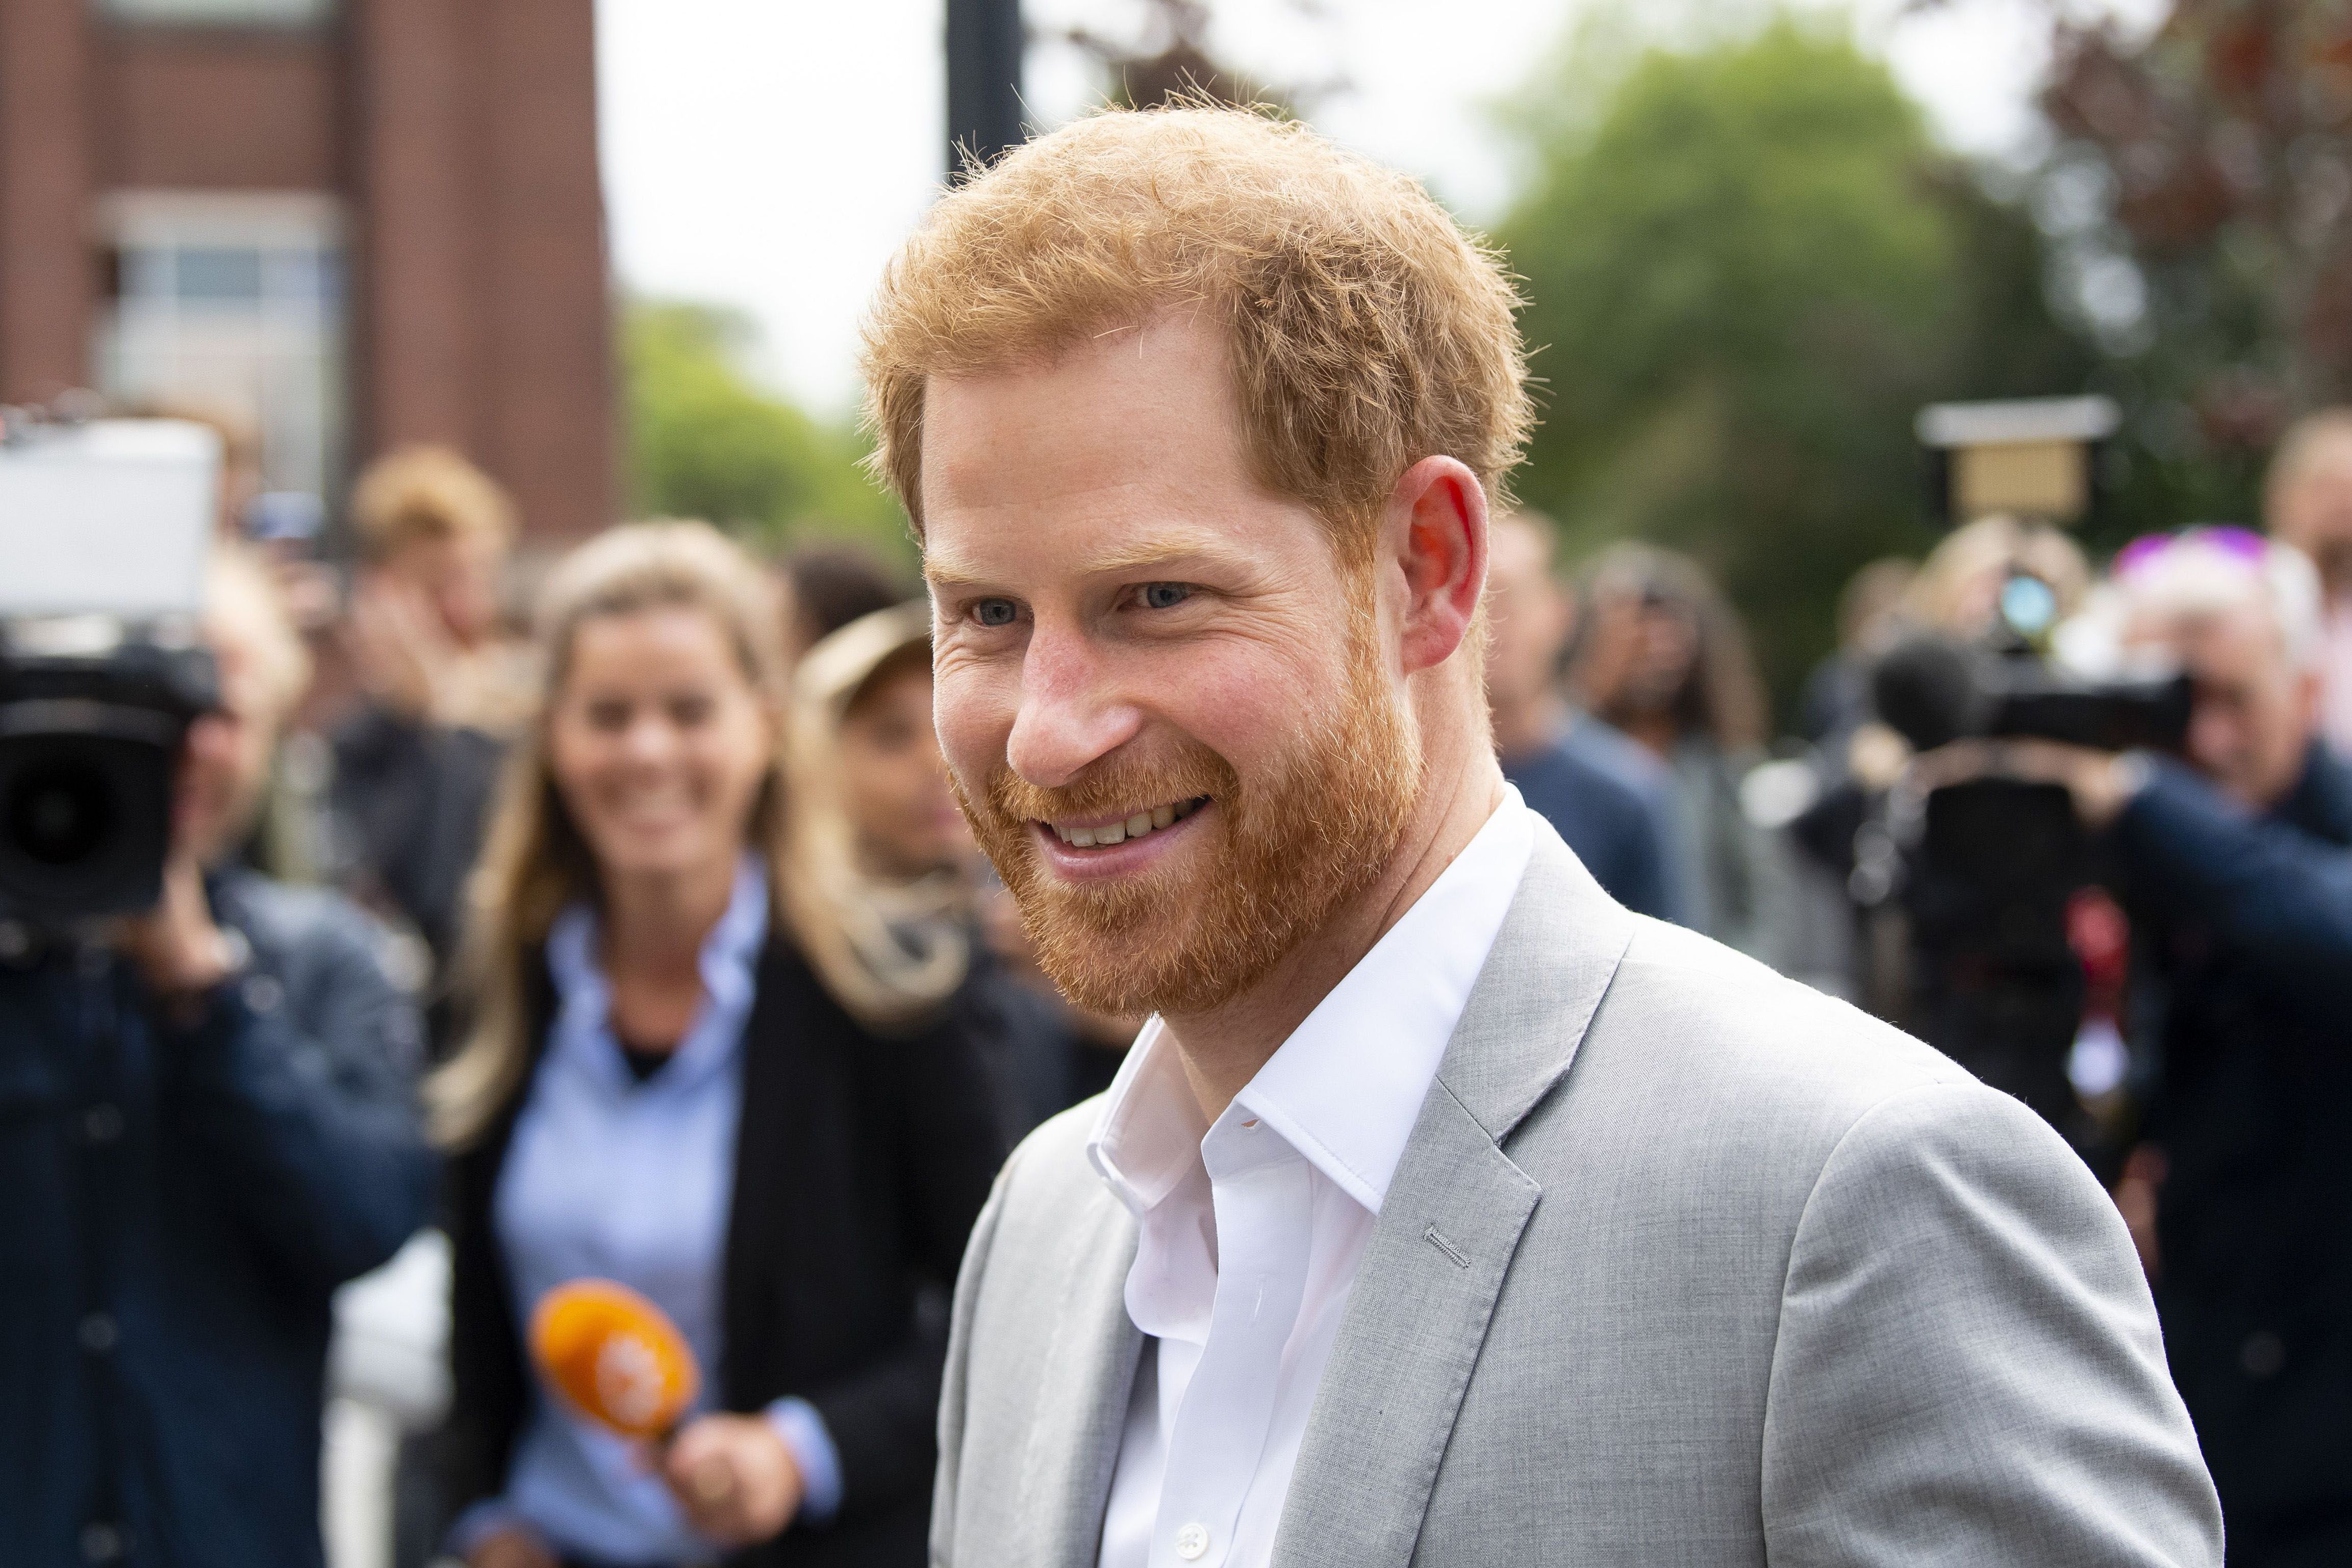 Prince Harry secures job at Silicon Valley startup